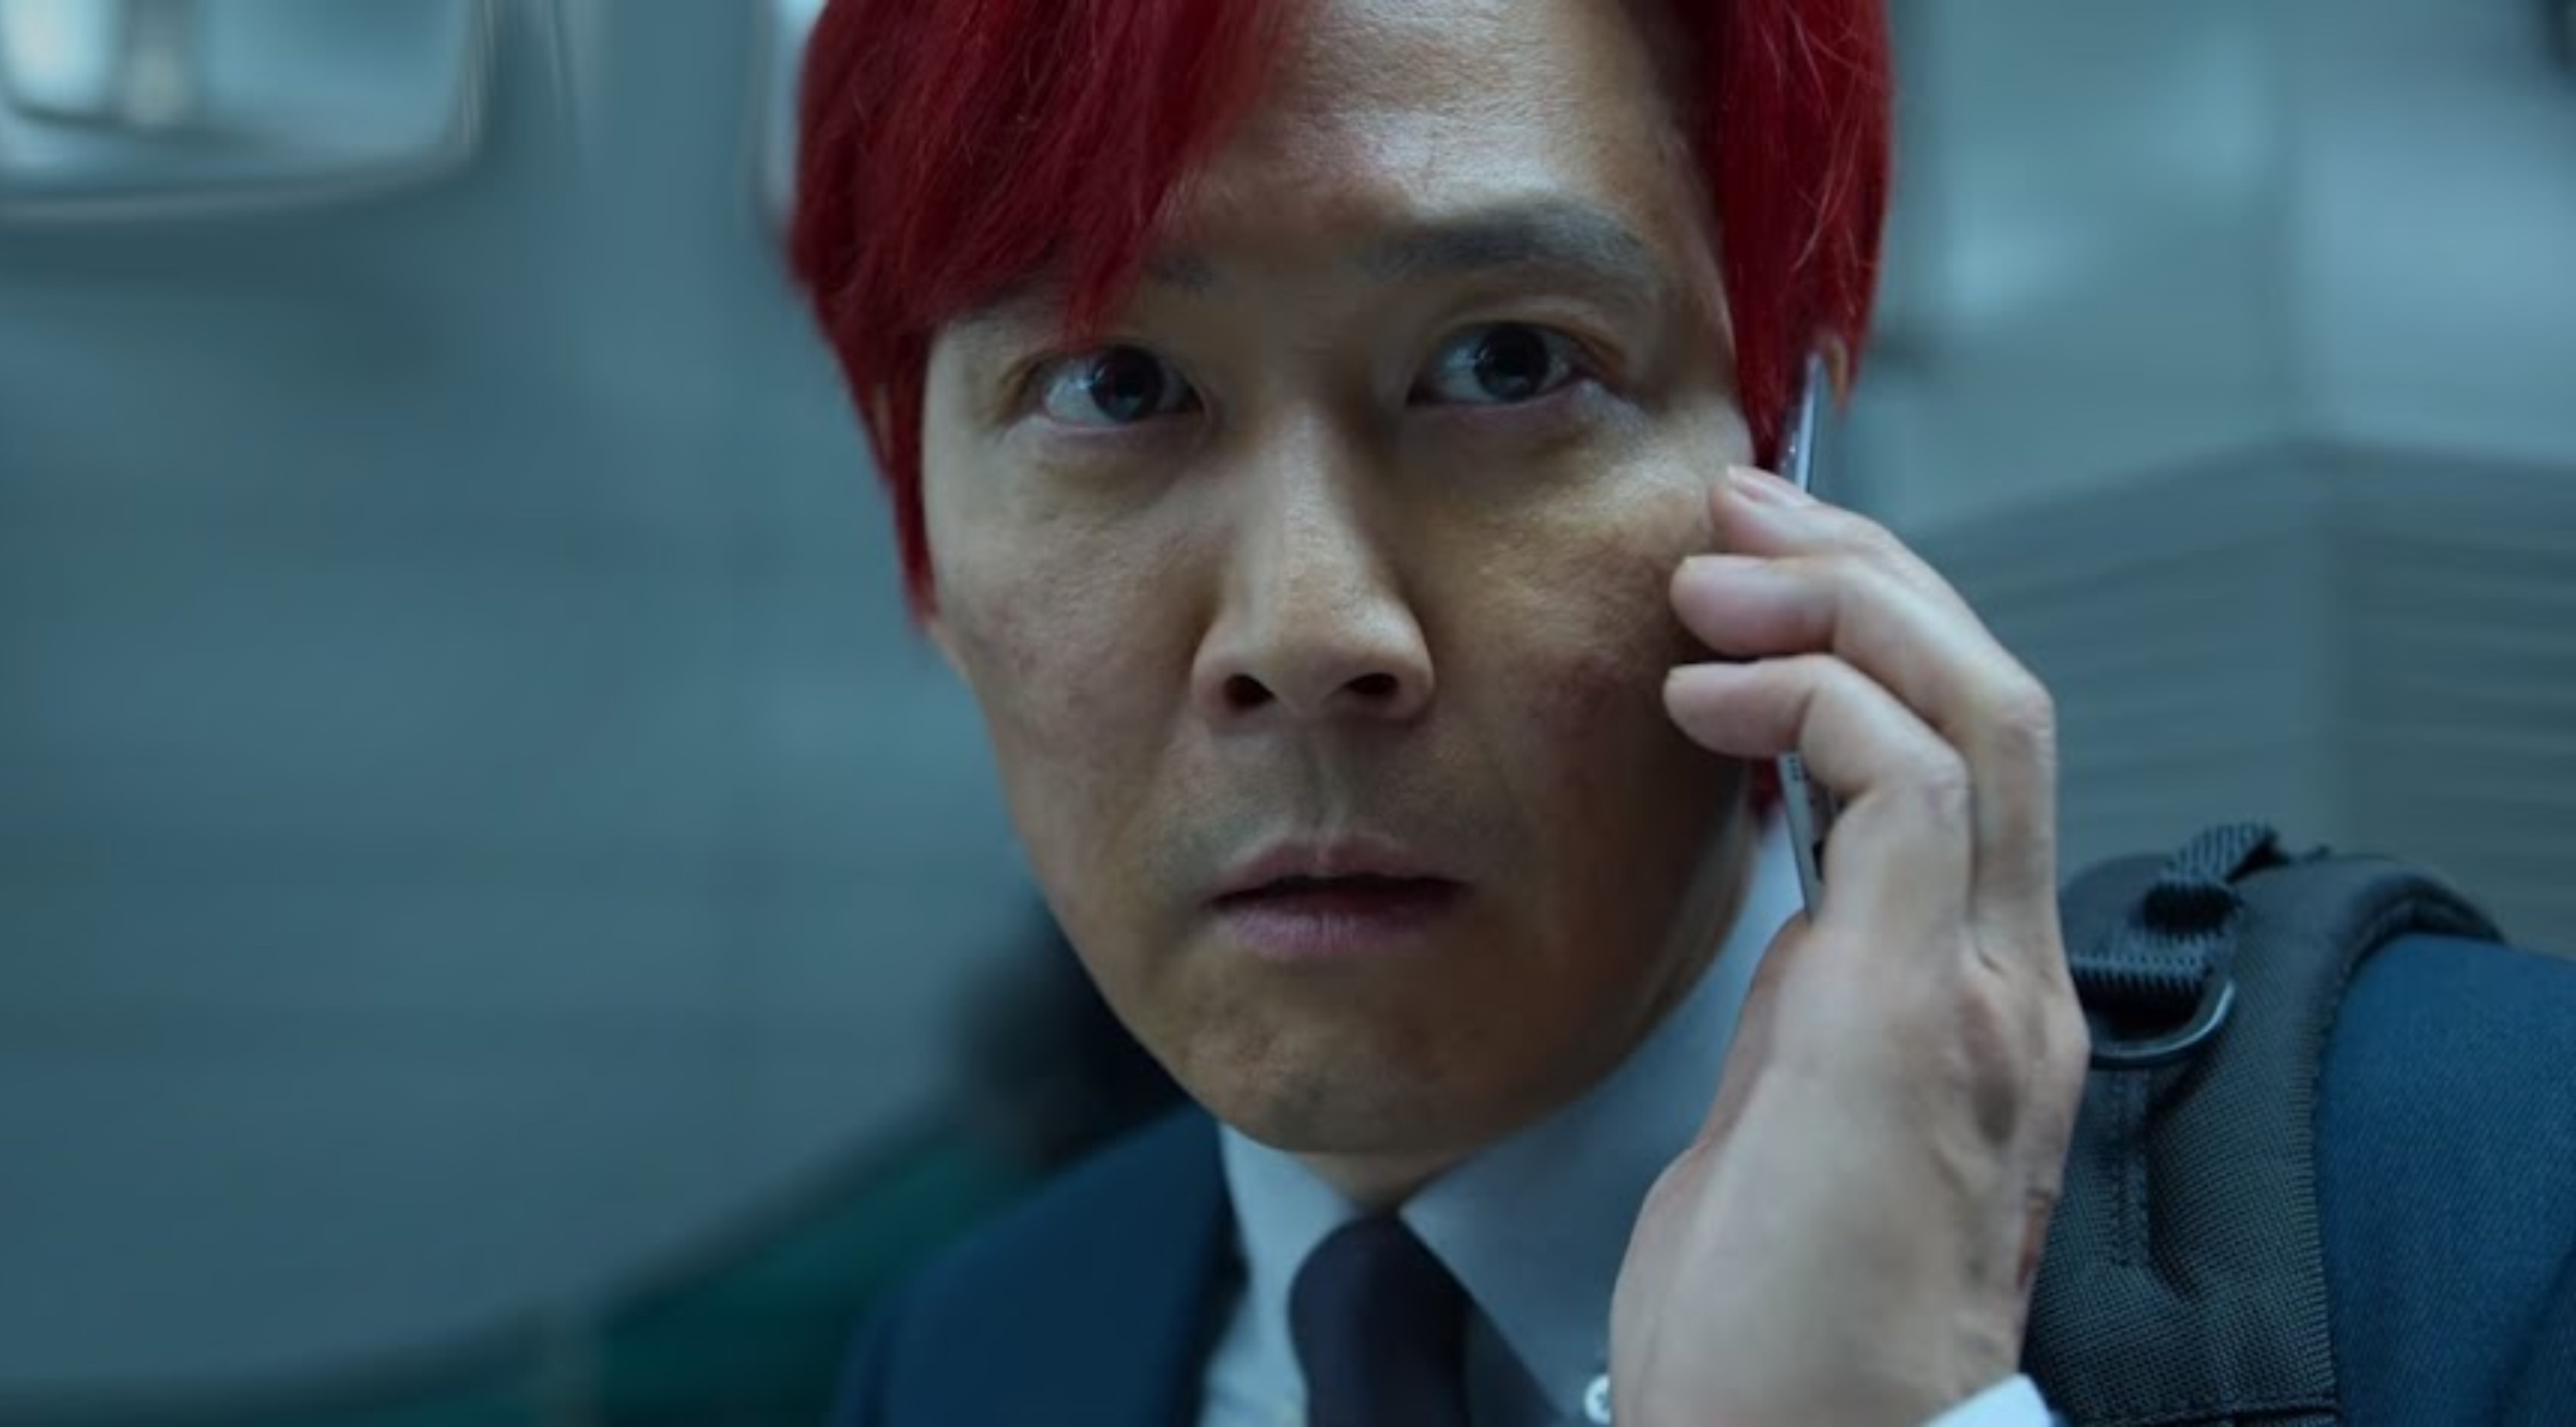 Seong Gi-hun character in 'Squid Game' ending scene talking on the phone with red hair.